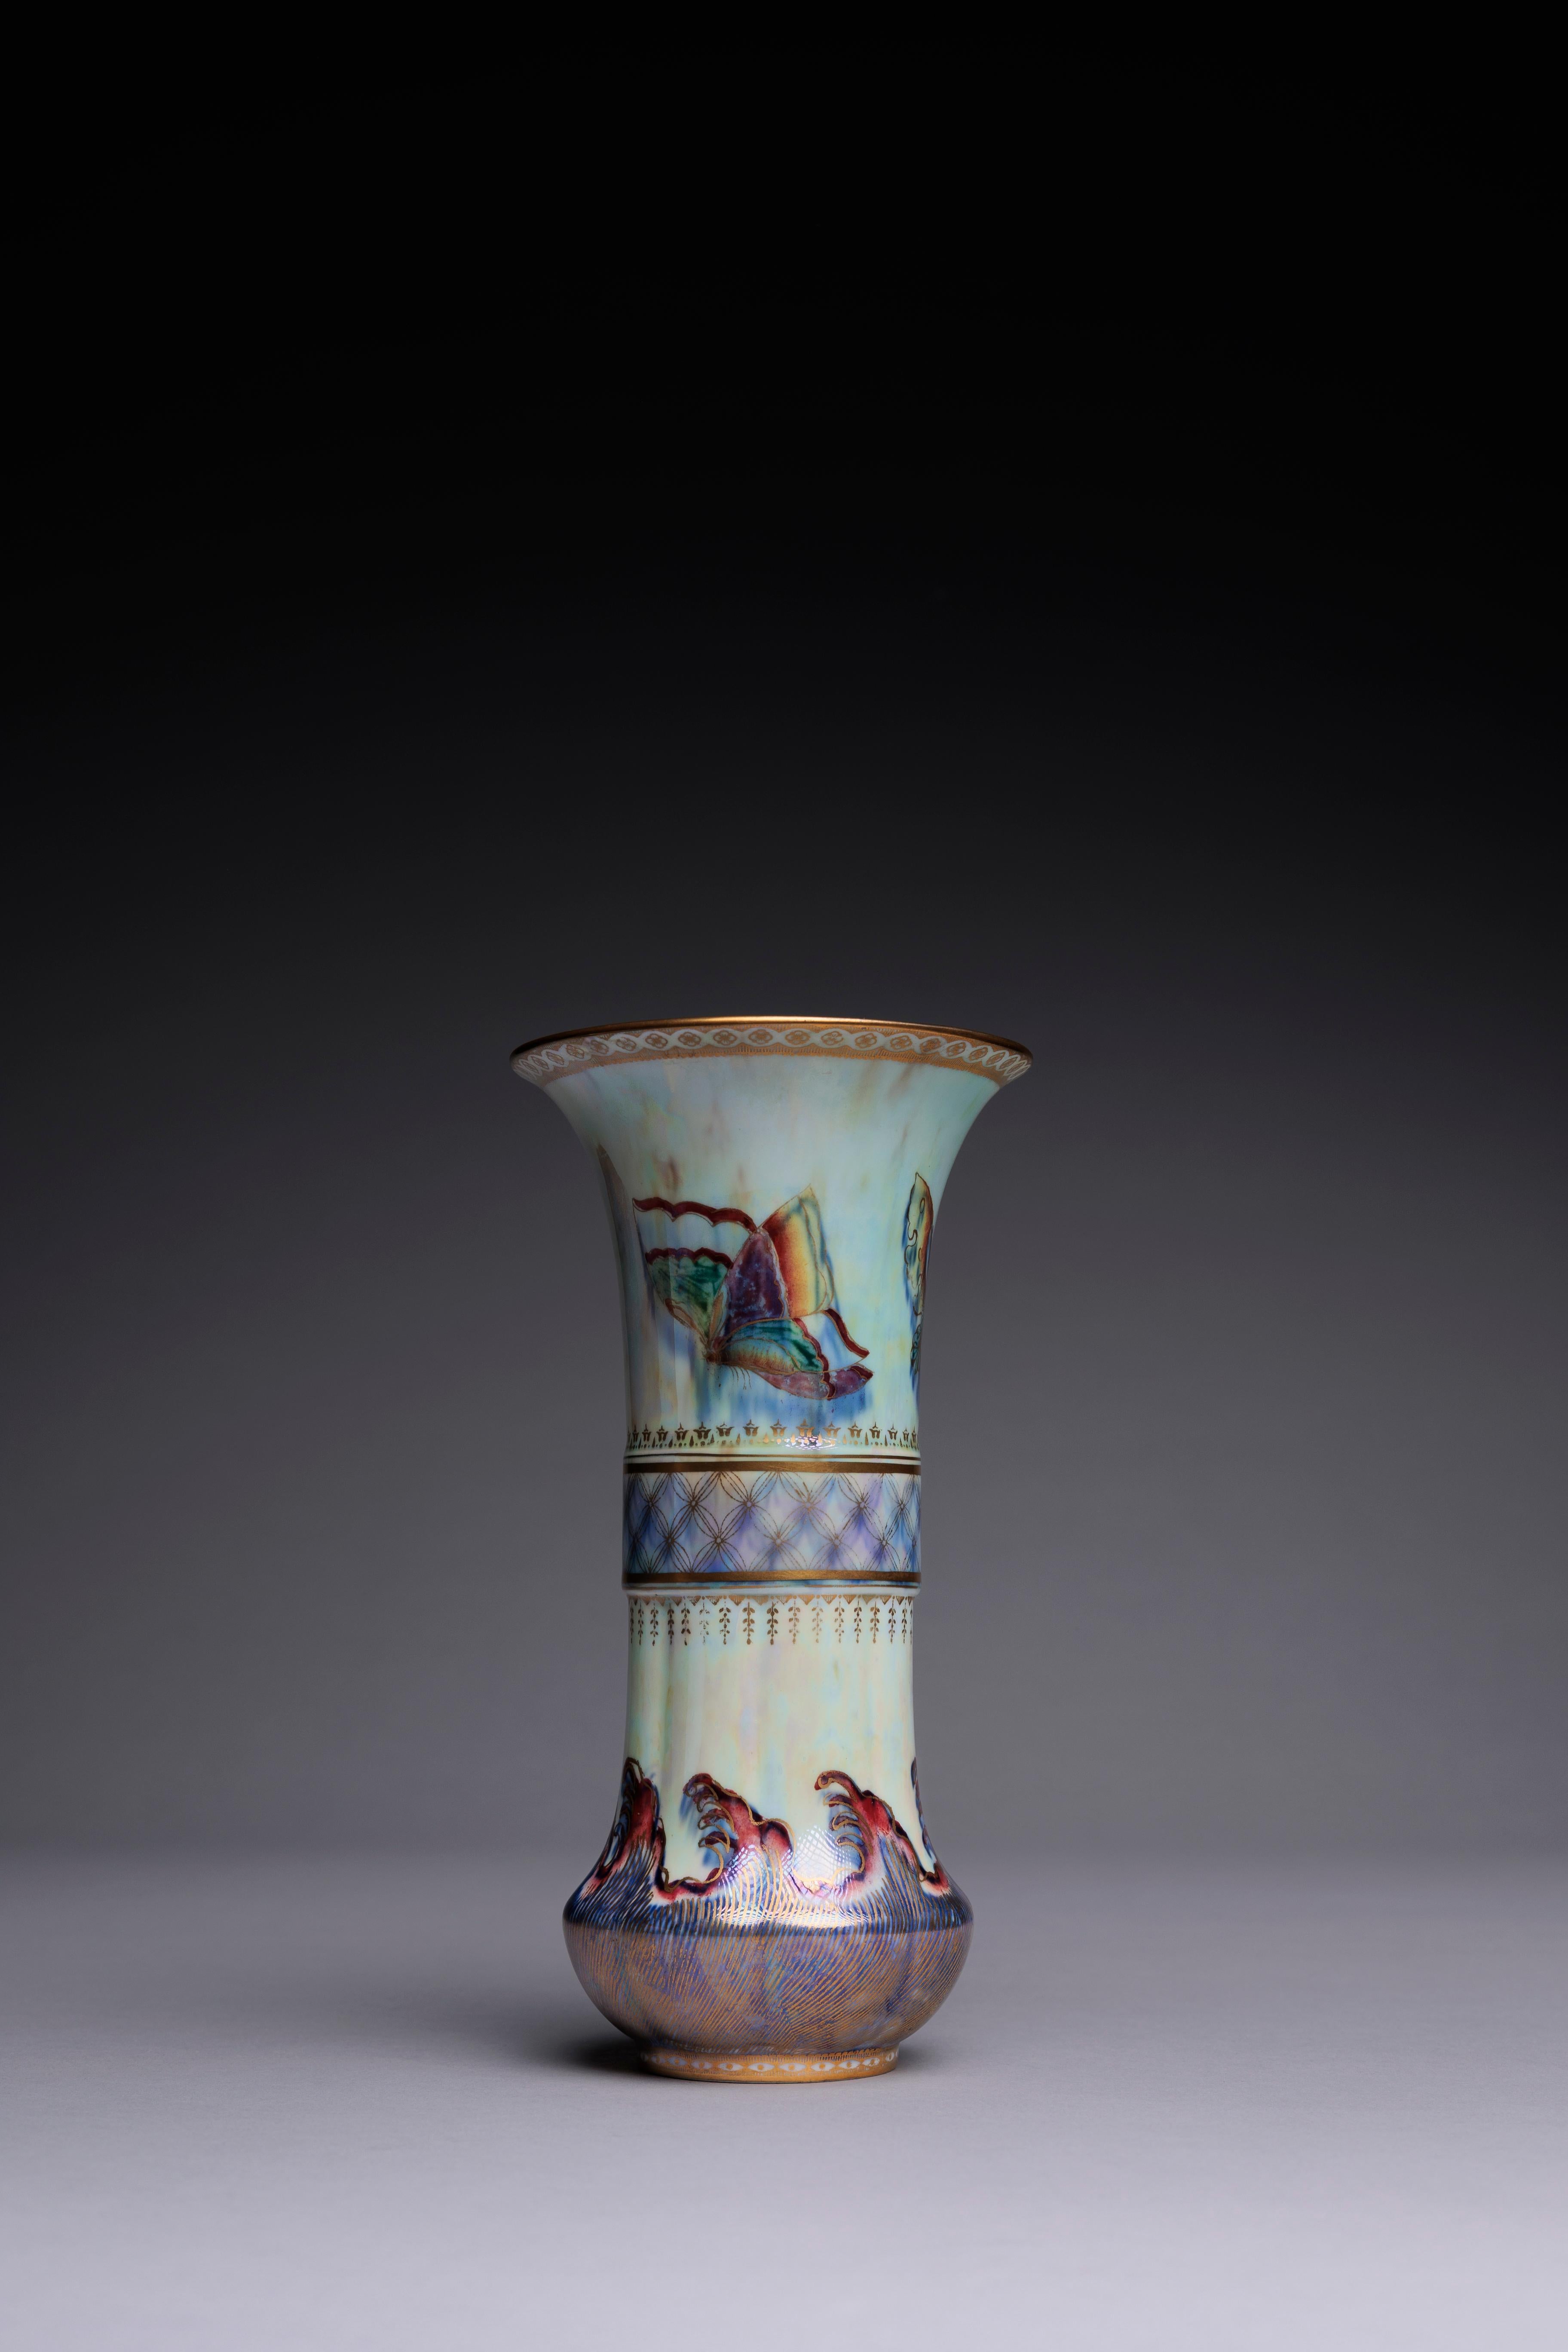 A Wedgwood Lustre Butterfly vase designed by Daisy Makeig-Jones circa 1915 as part of her revolutionary Ordinary Lustres line at the manufactory.

This Wedgwood lustreware vase is a unique application of Daisy Makeig-Jones’s ‘Butterfly’ pattern. The